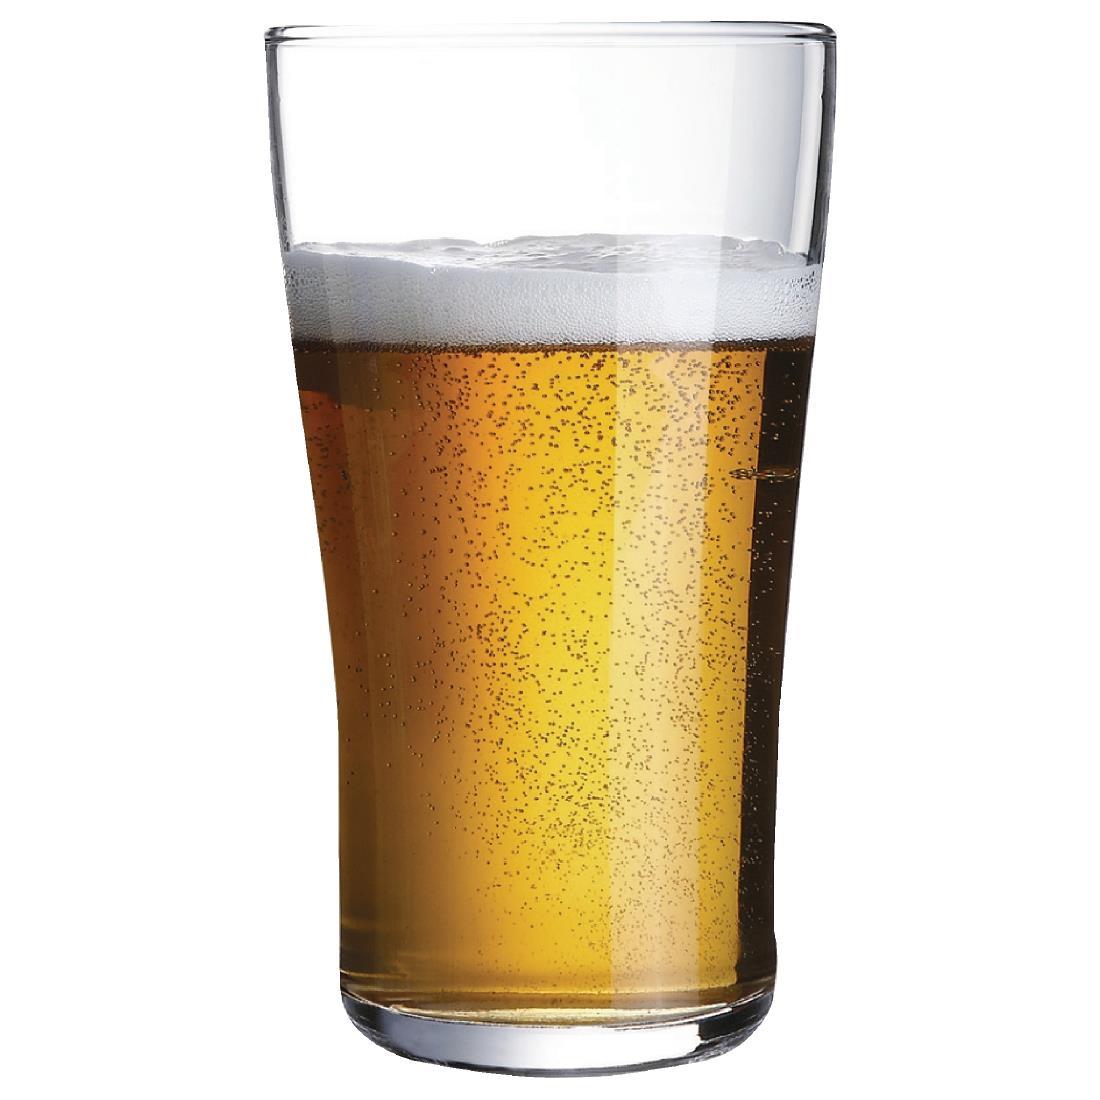 Arcoroc Ultimate Beer Glasses 570ml CE Marked (Pack of 36) - GC541  - 3